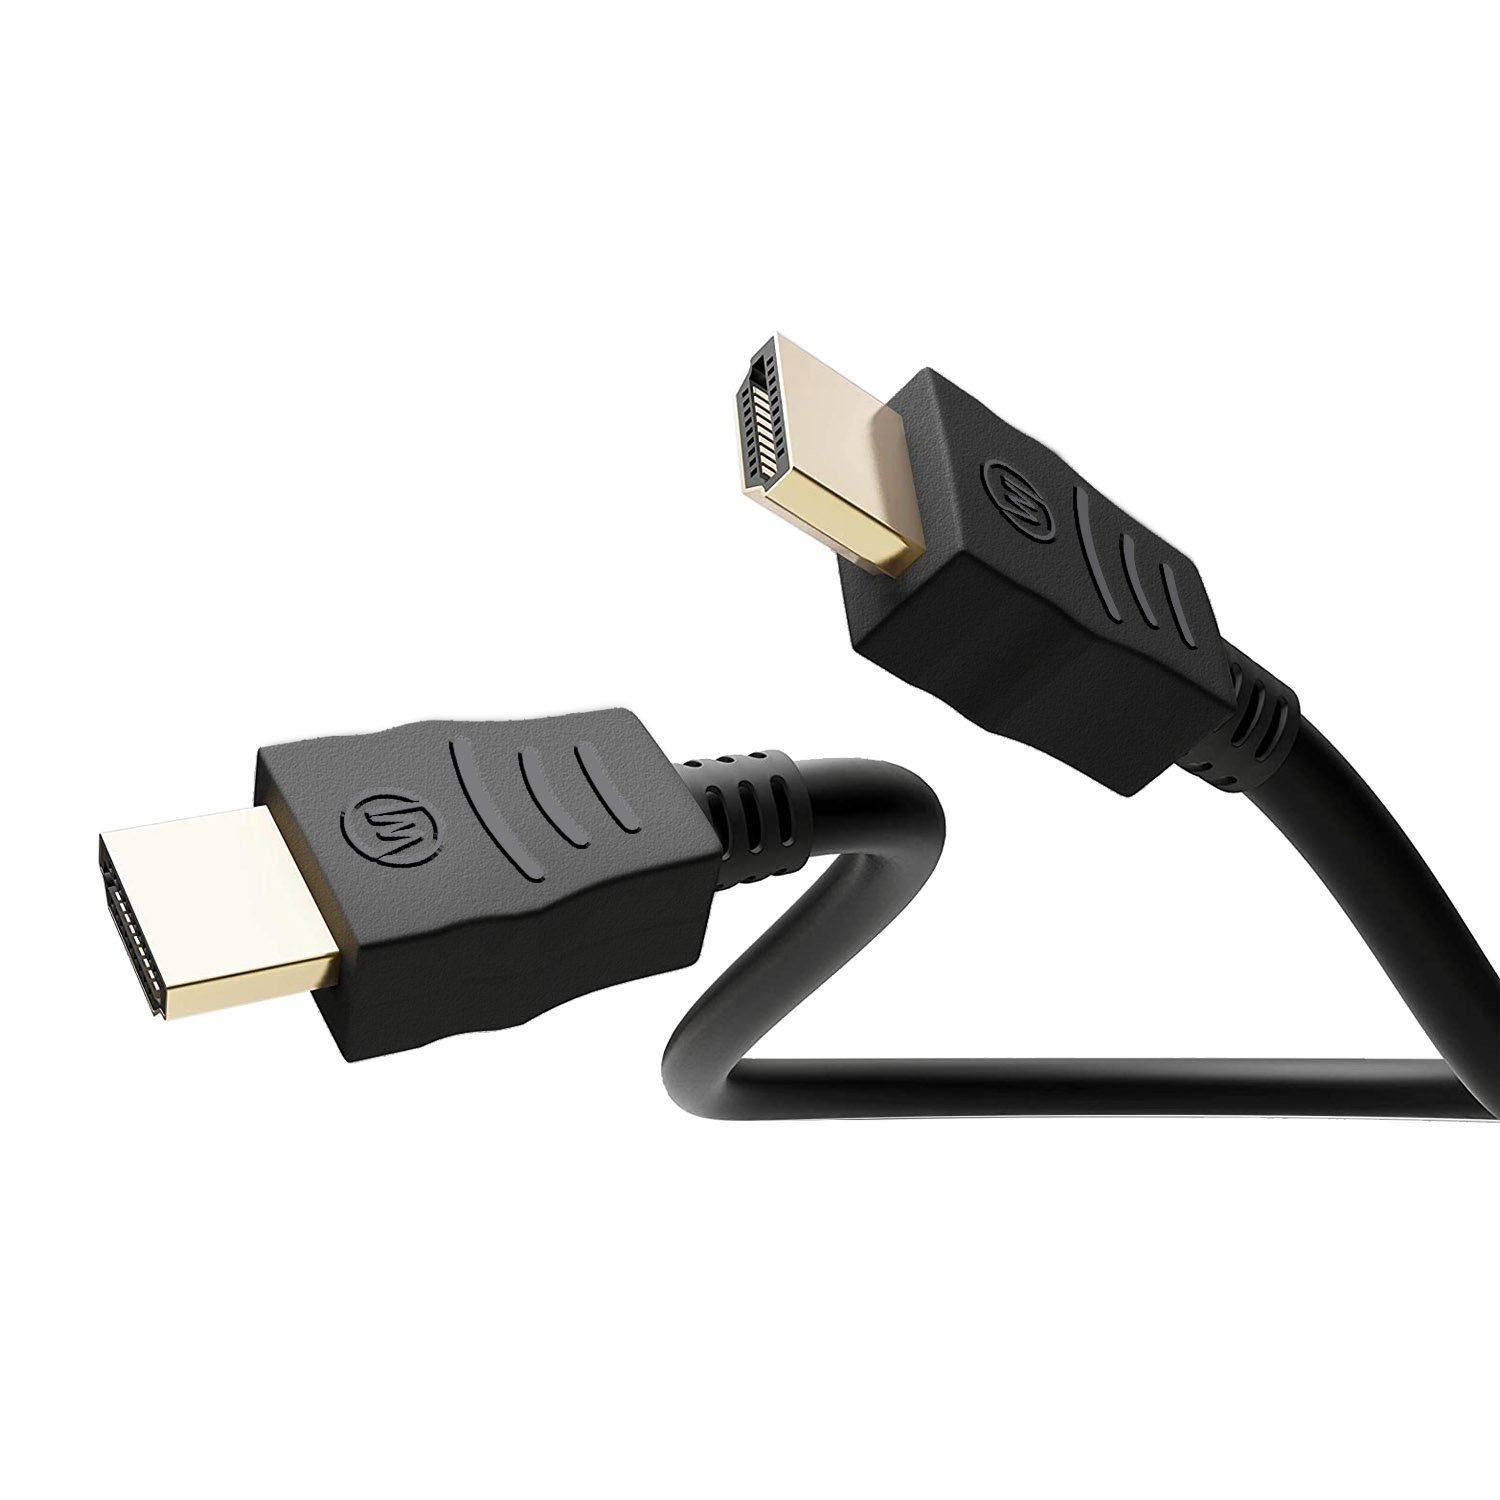 eARC, HDR HDMI HDCP Playstation PS5, II, Sonos für 10, / Xbox Kabel 2m 5 CHILI ARC, S, HDMI-Kabel 2.2, 2.1, X UHD WICKED 8K